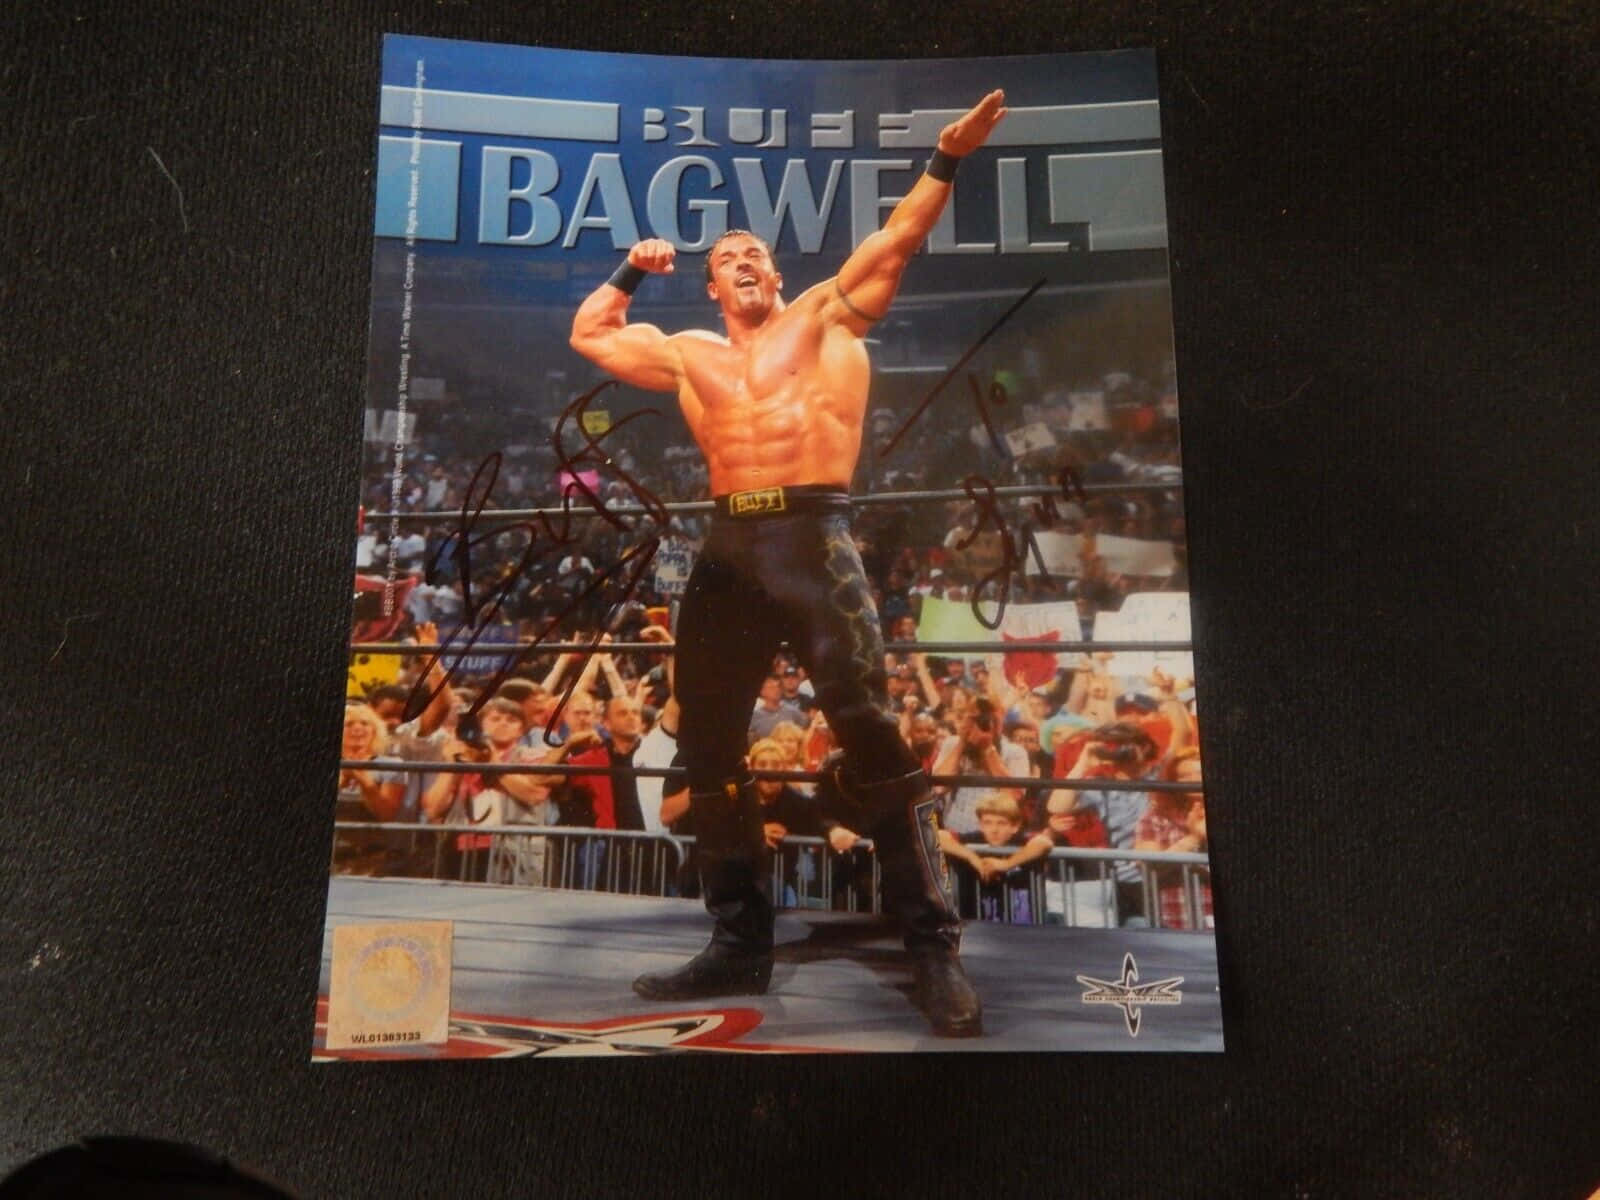 Caption: Buff Bagwell's Autographed Book Cover Wallpaper